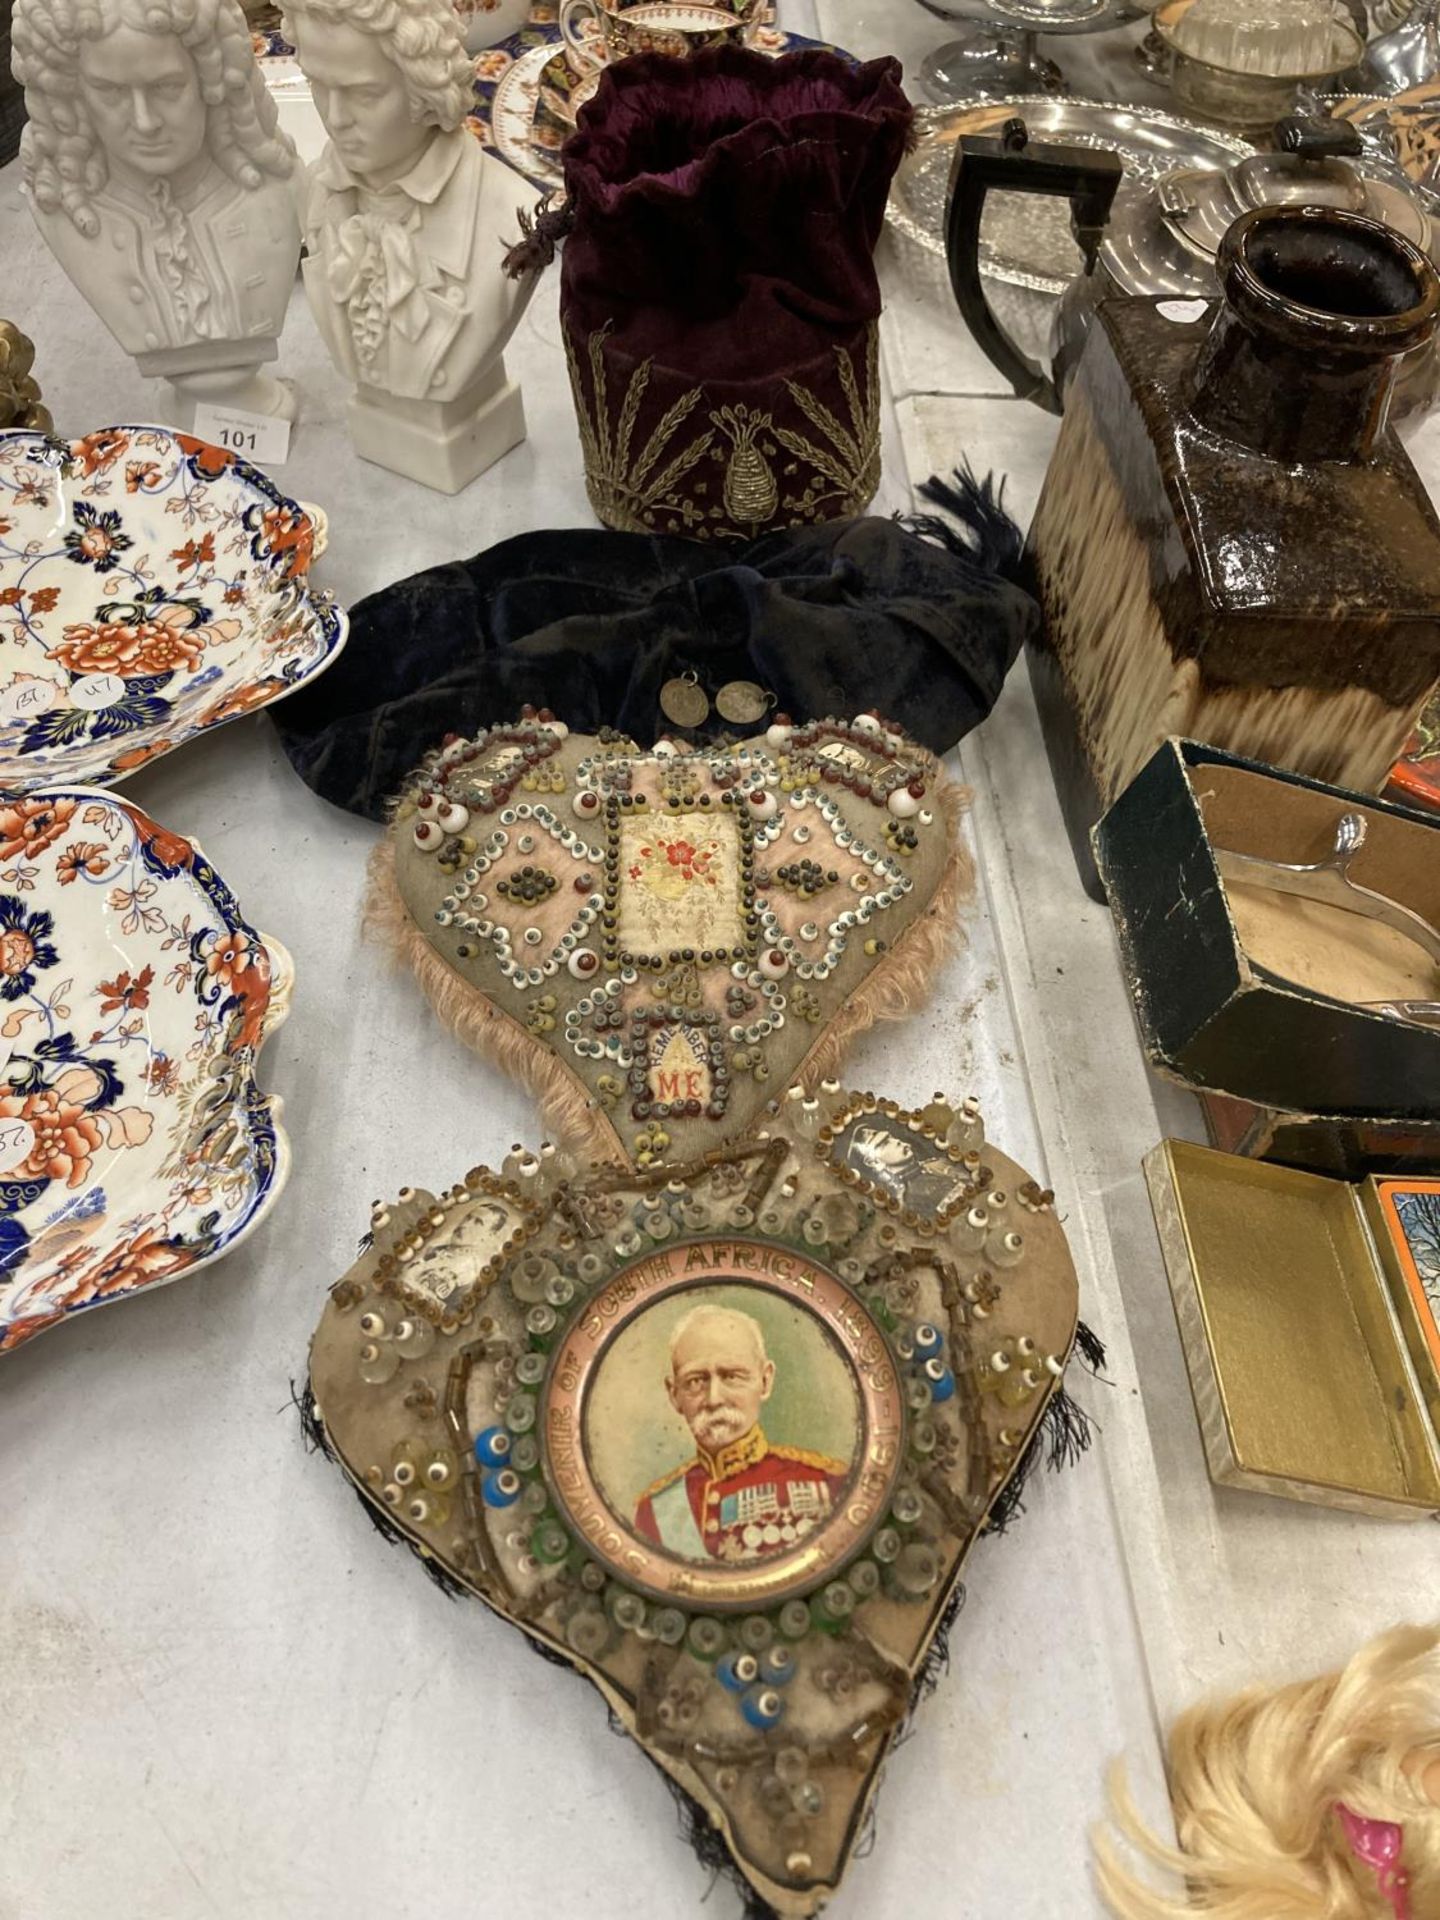 TWO VICTORIAN HEART SHAPED CUSHIONS, ONE 'REMEMBER ME' THE OTHER WITH A PICTURE OF LORD ROBERTS, A